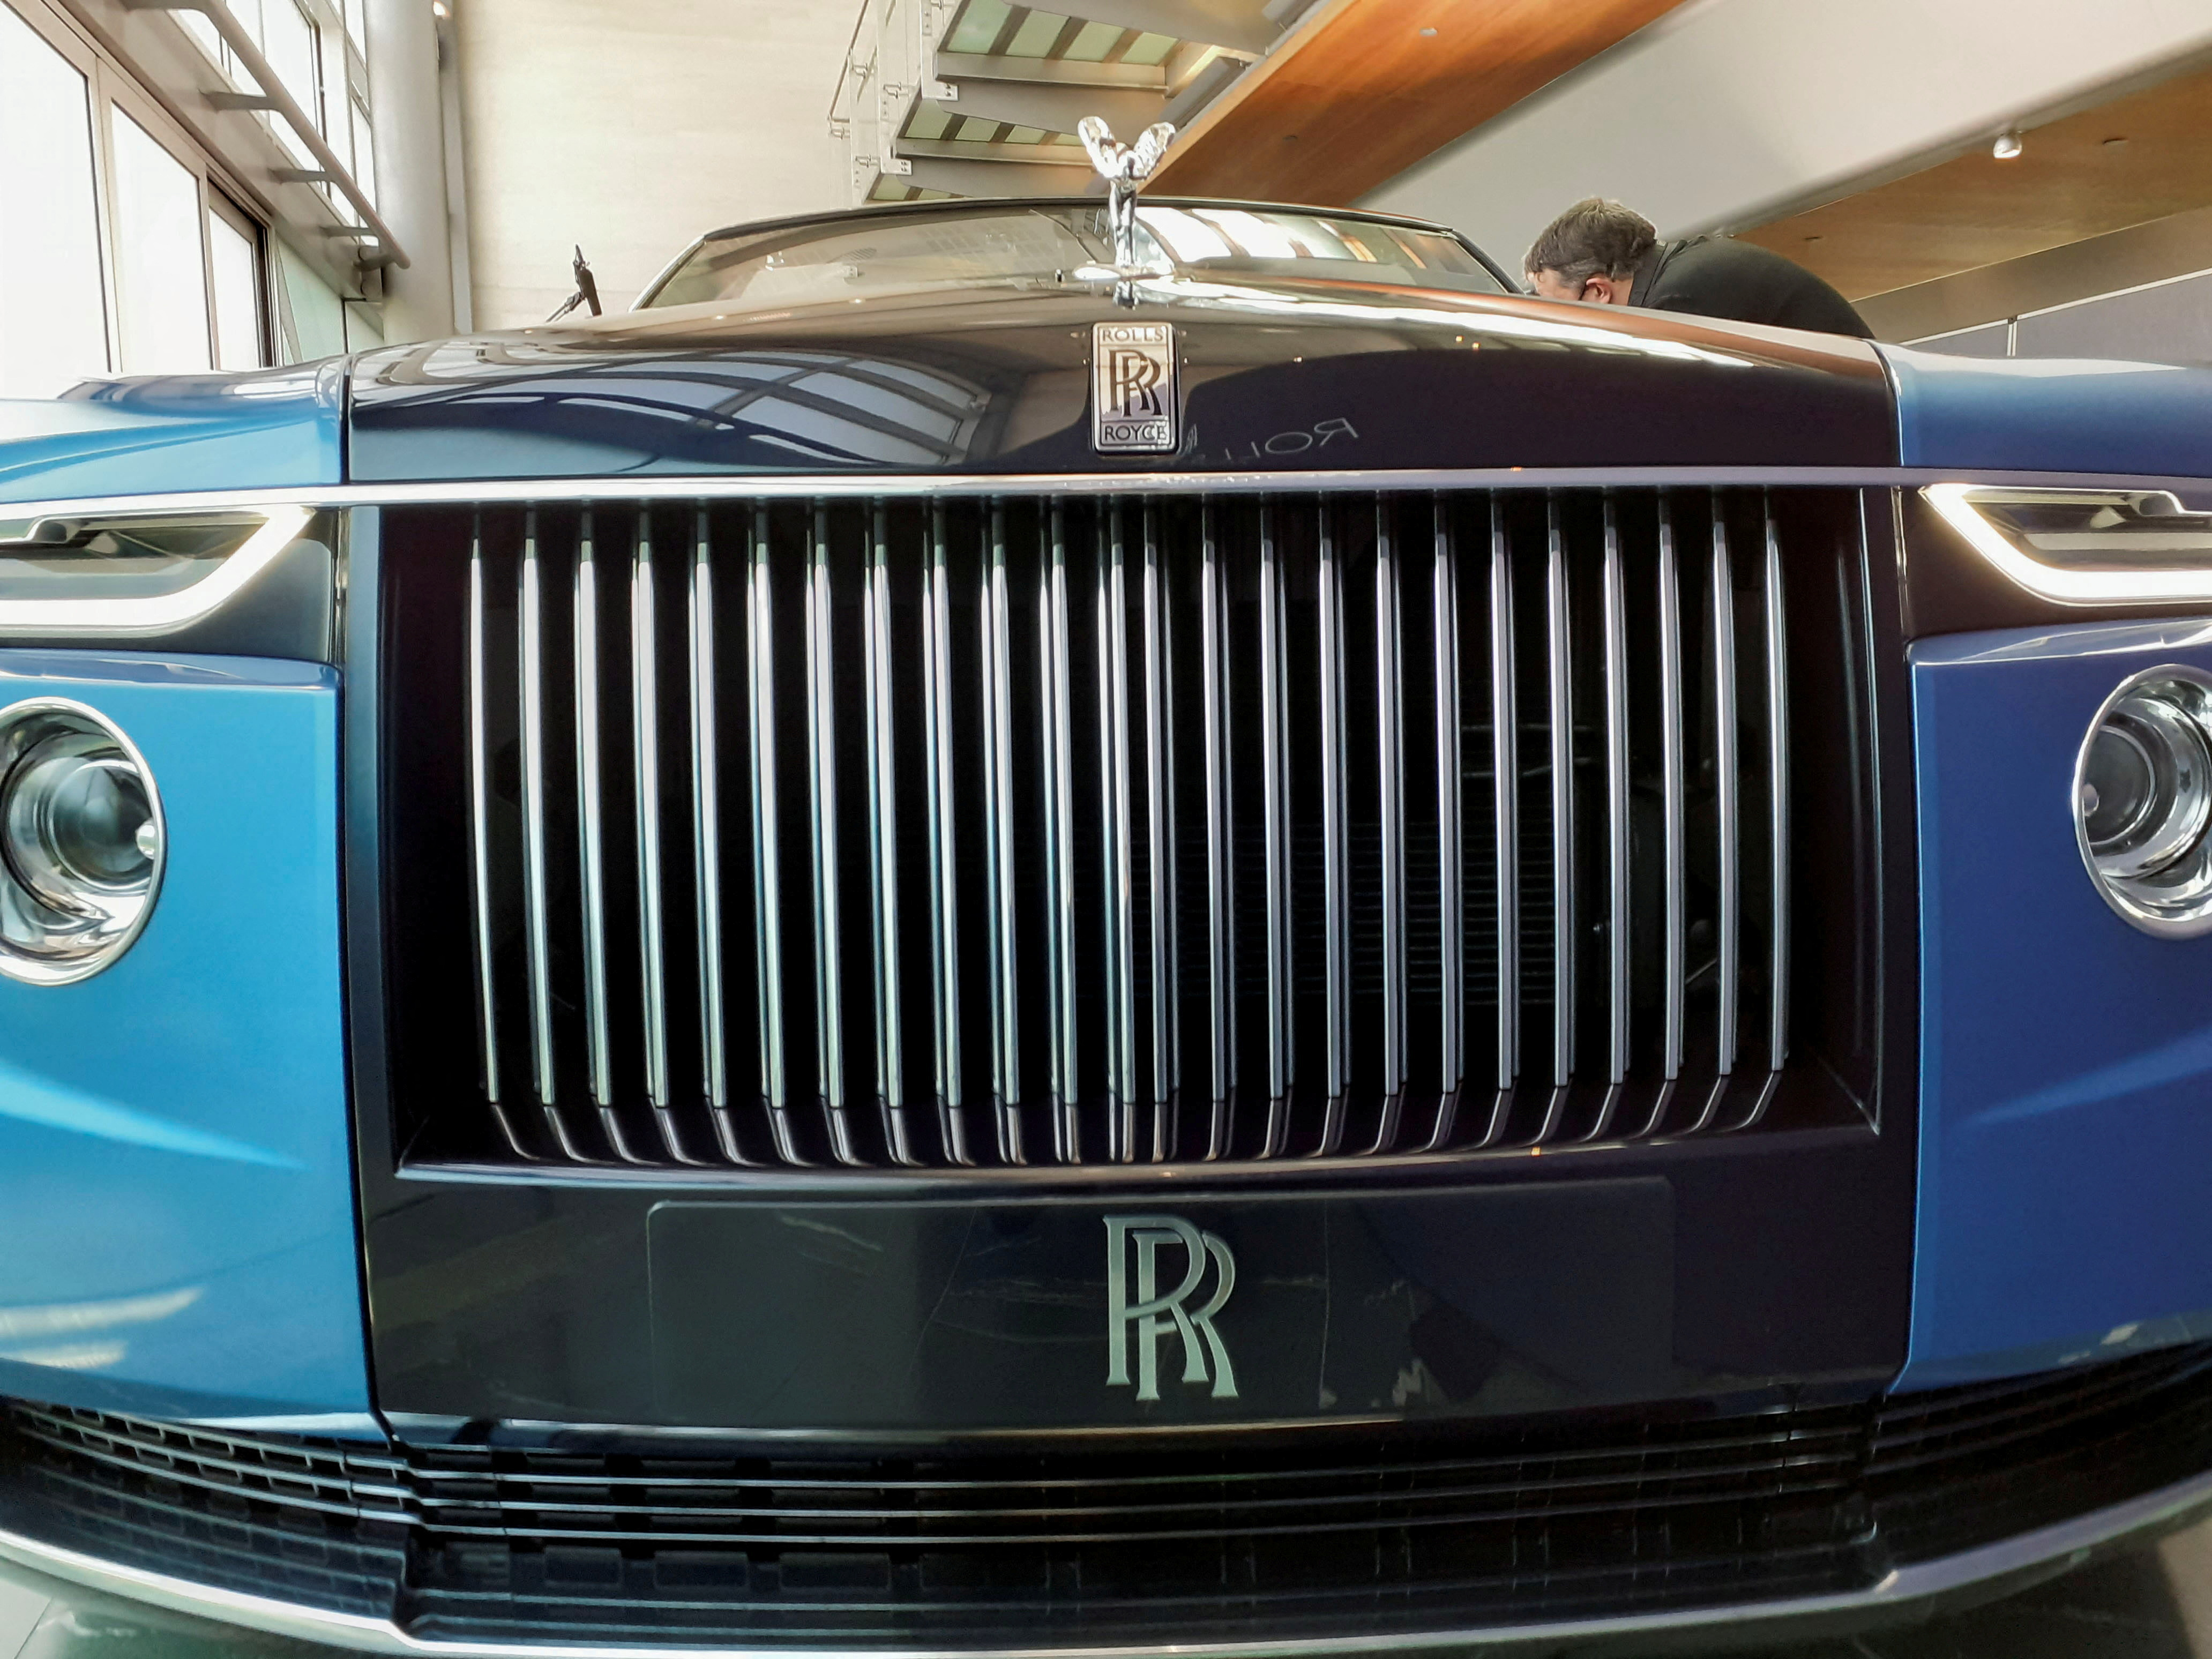 A hand made Rolls-Royce described as 'the most refined picnic facility on earth' is unveiled at the company’s factory in Goodwood